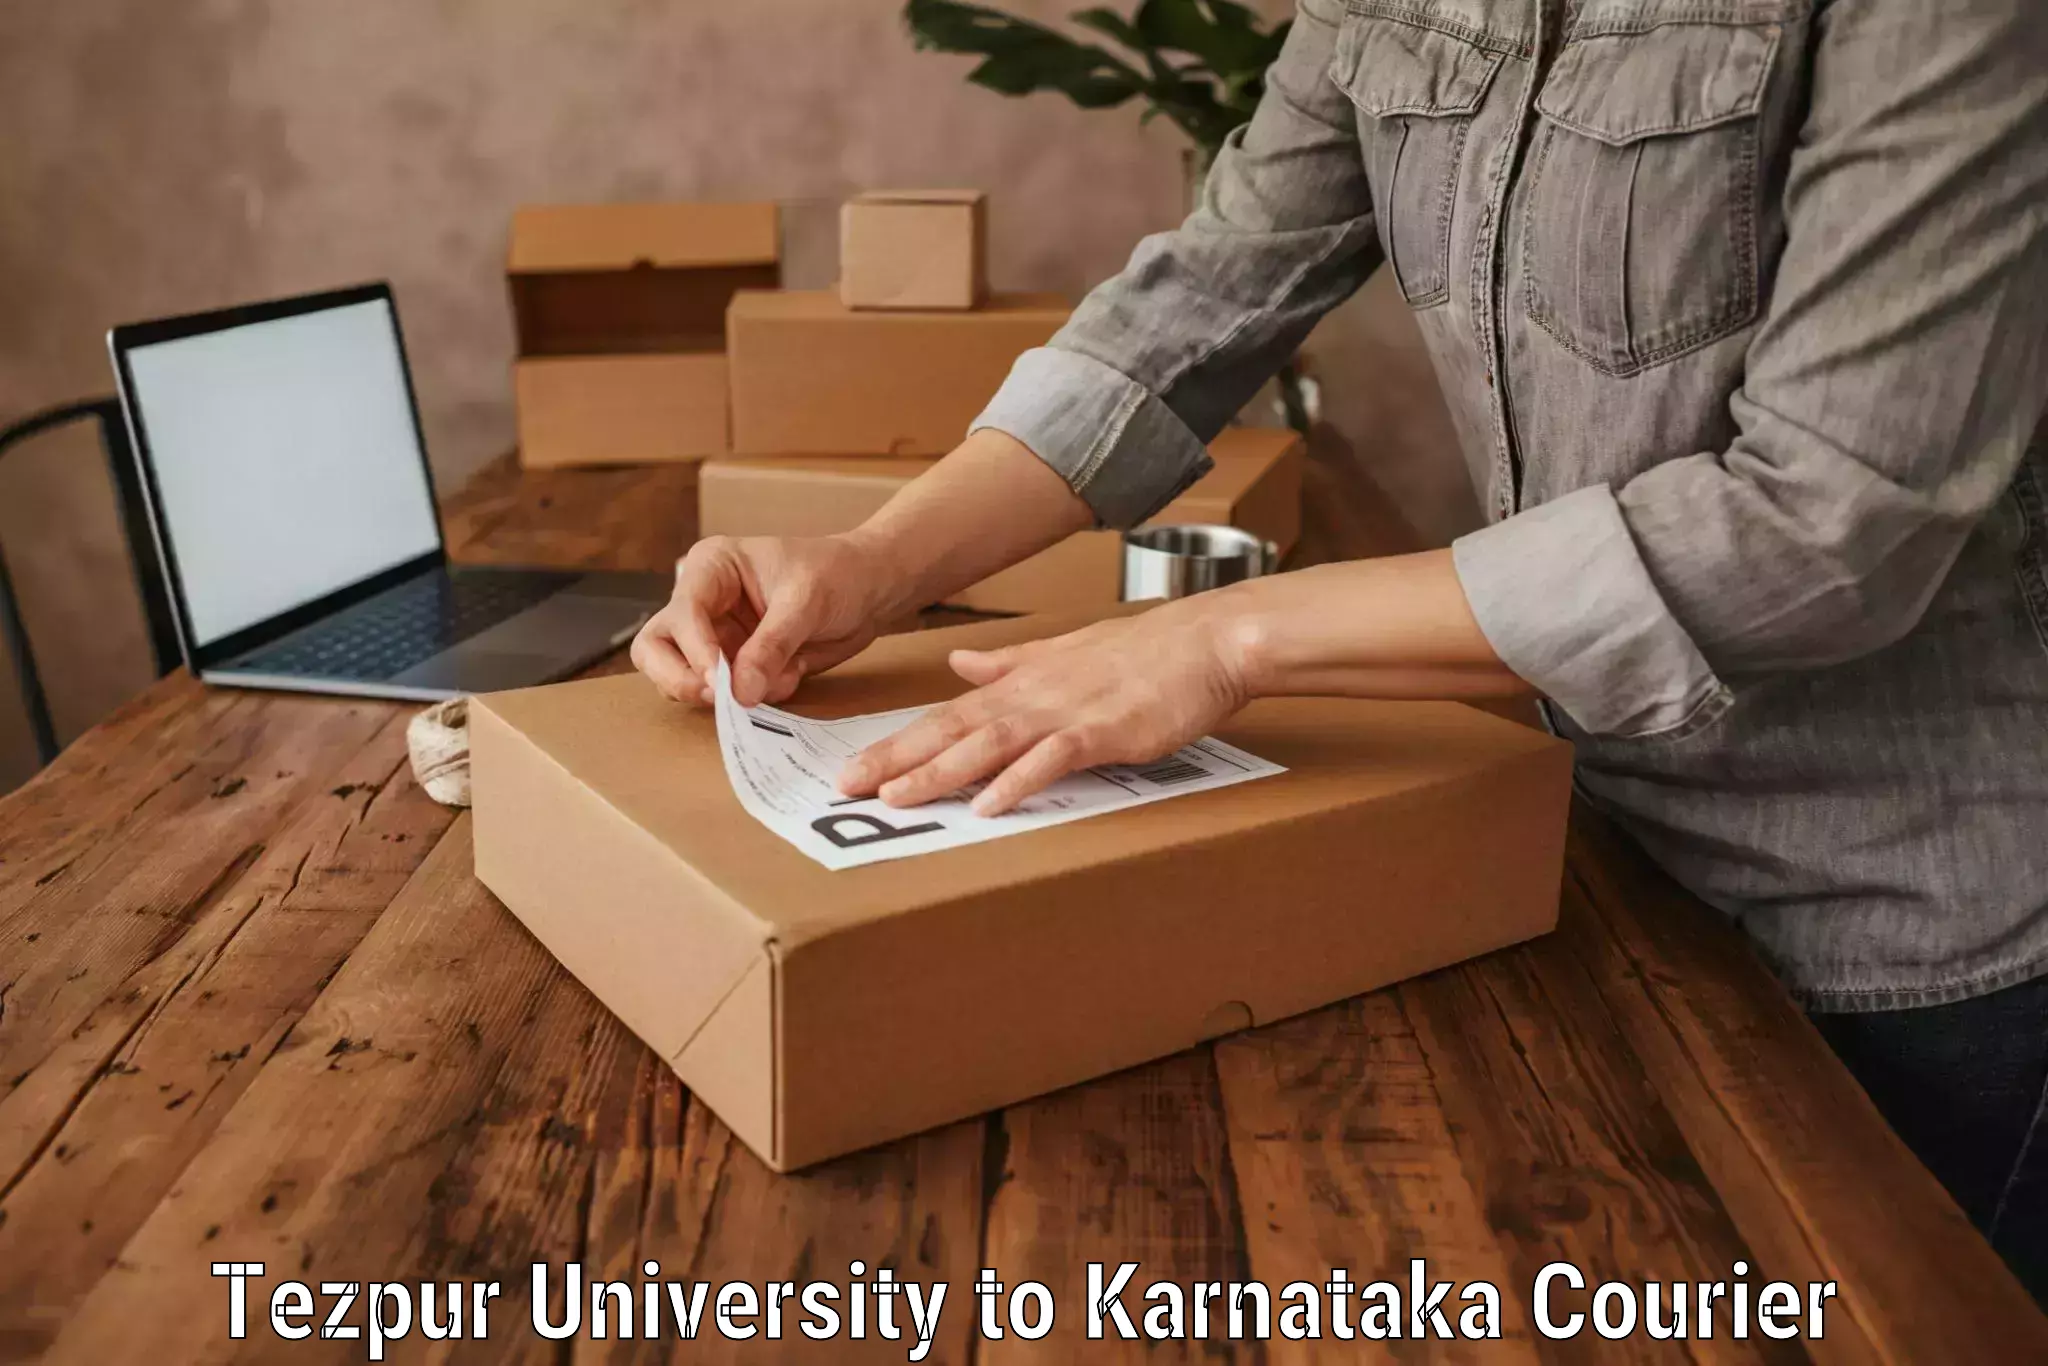 Reliable luggage courier Tezpur University to Manipal